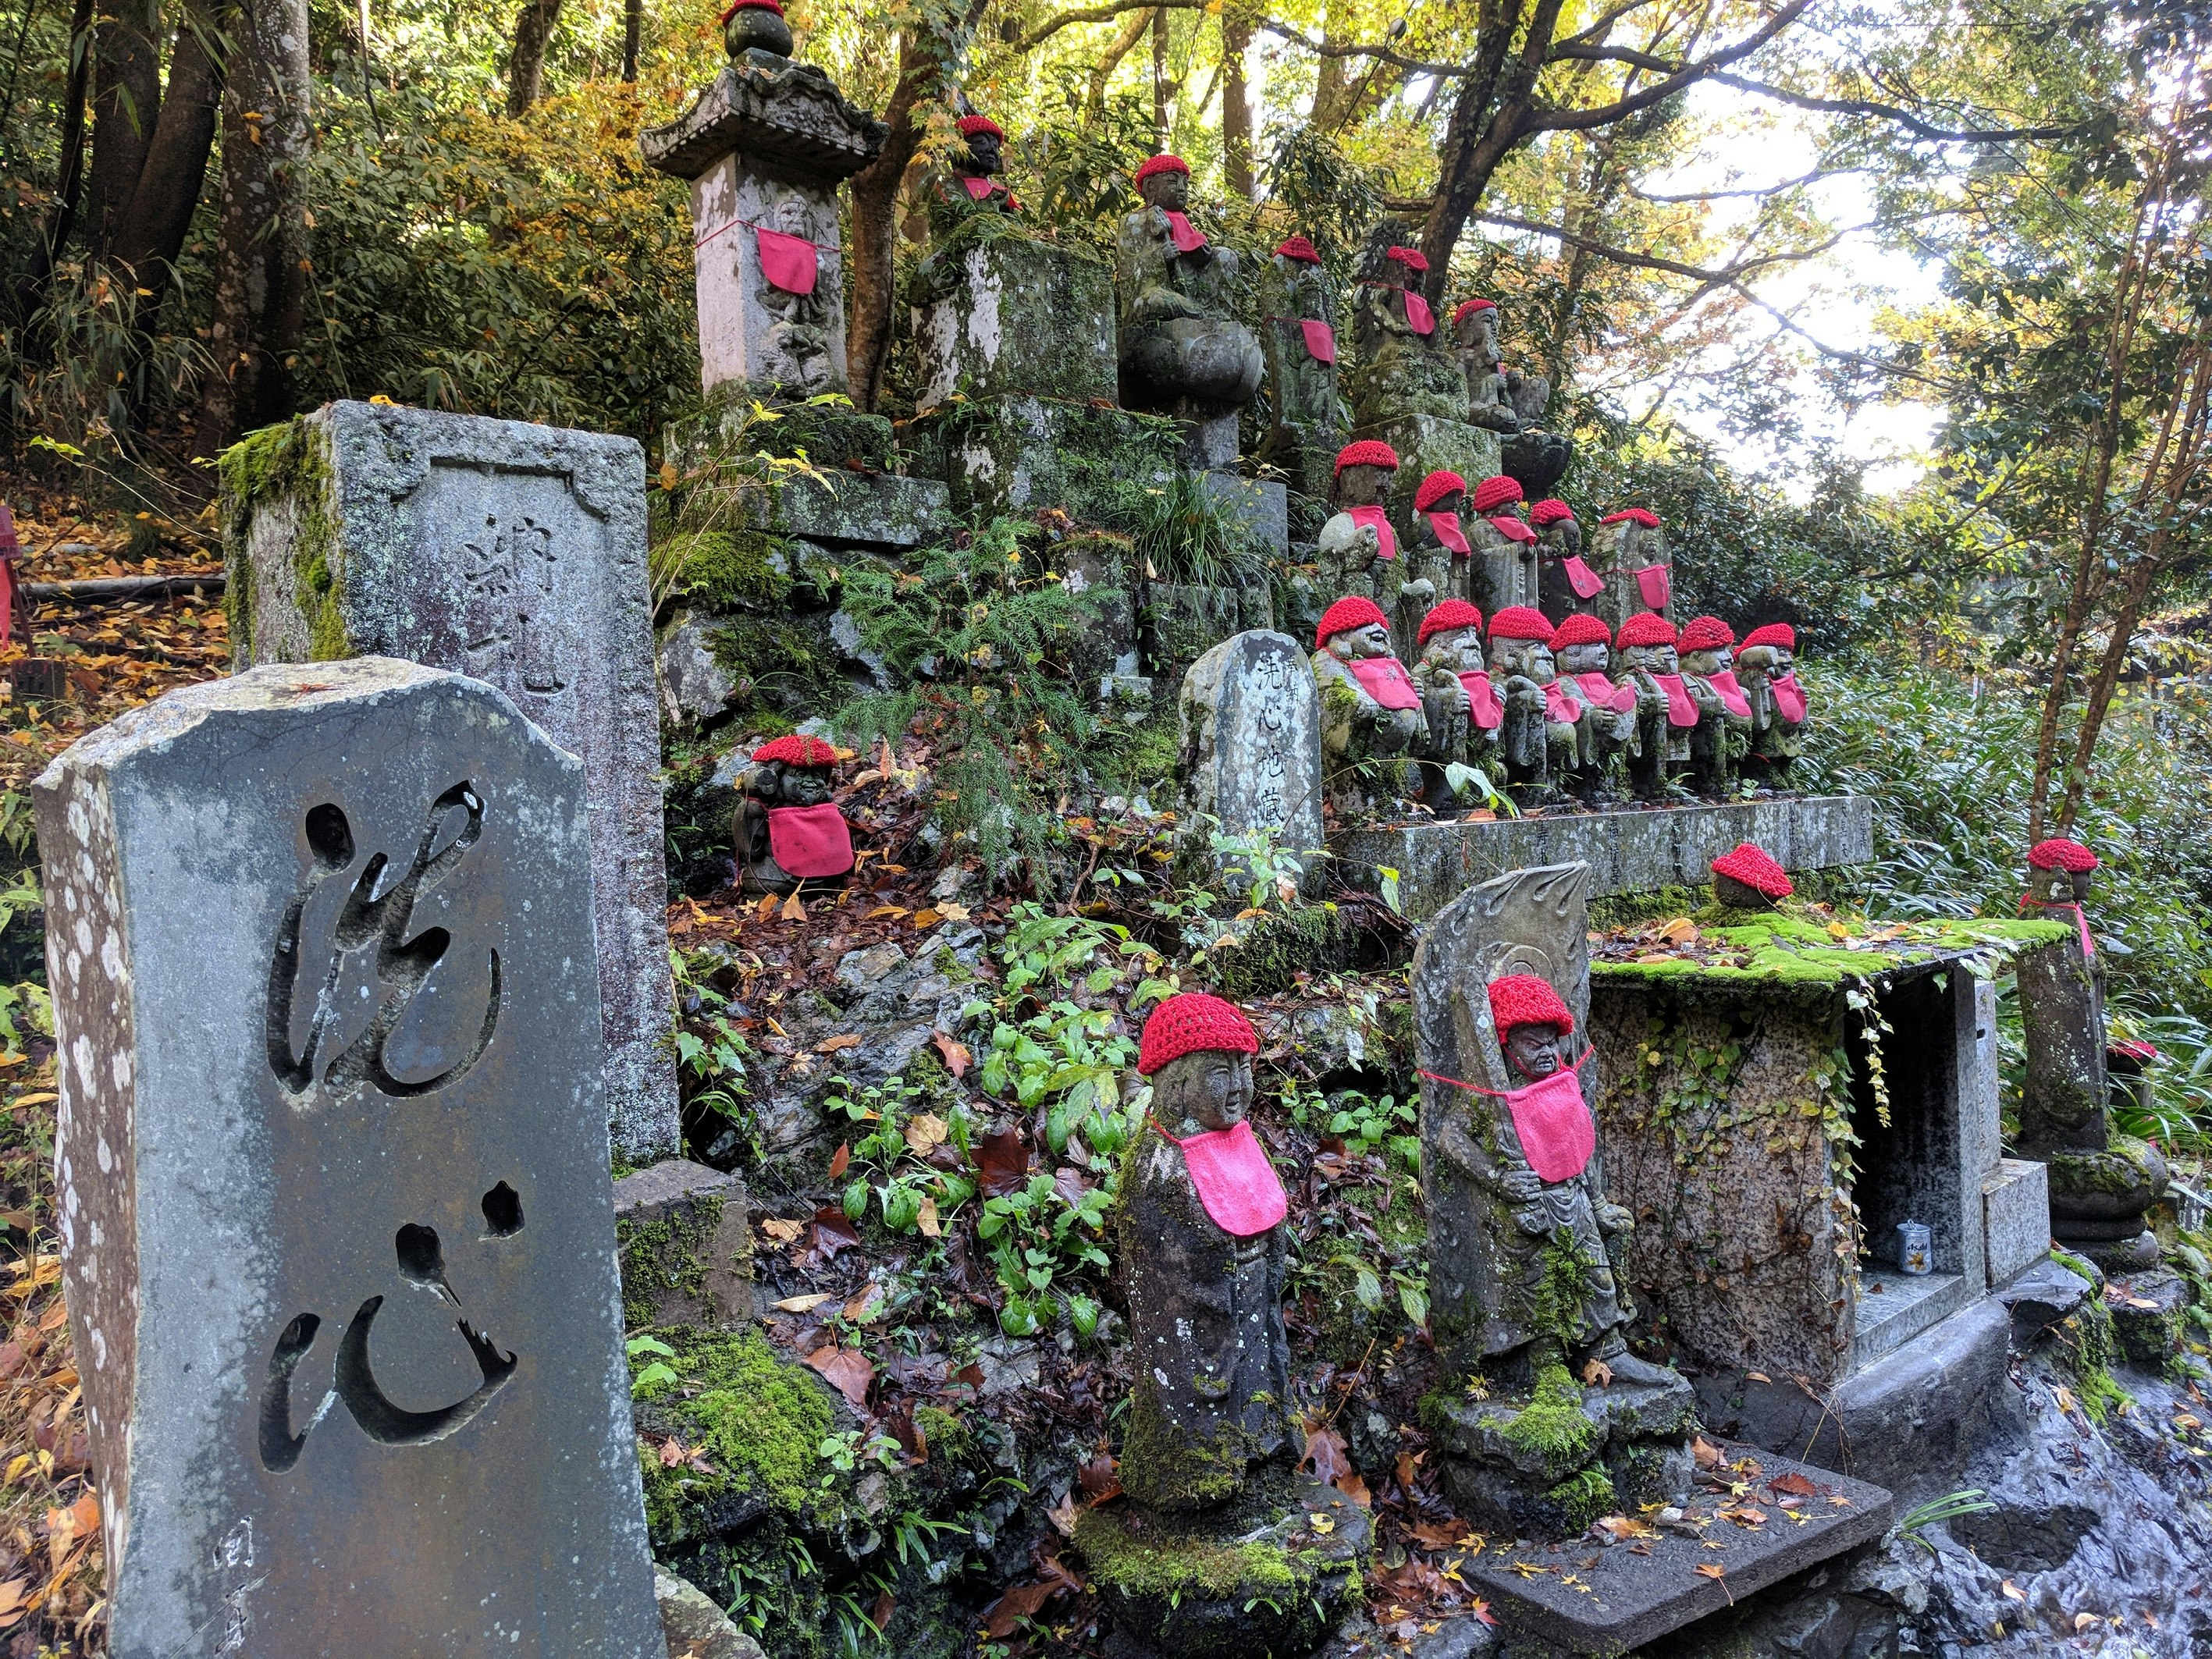 A number of stone statues stand amidst the undergrowth at the base of Mt Takao in Tokyo. The small stone statues have been adorned with red hats and matching red bibs.